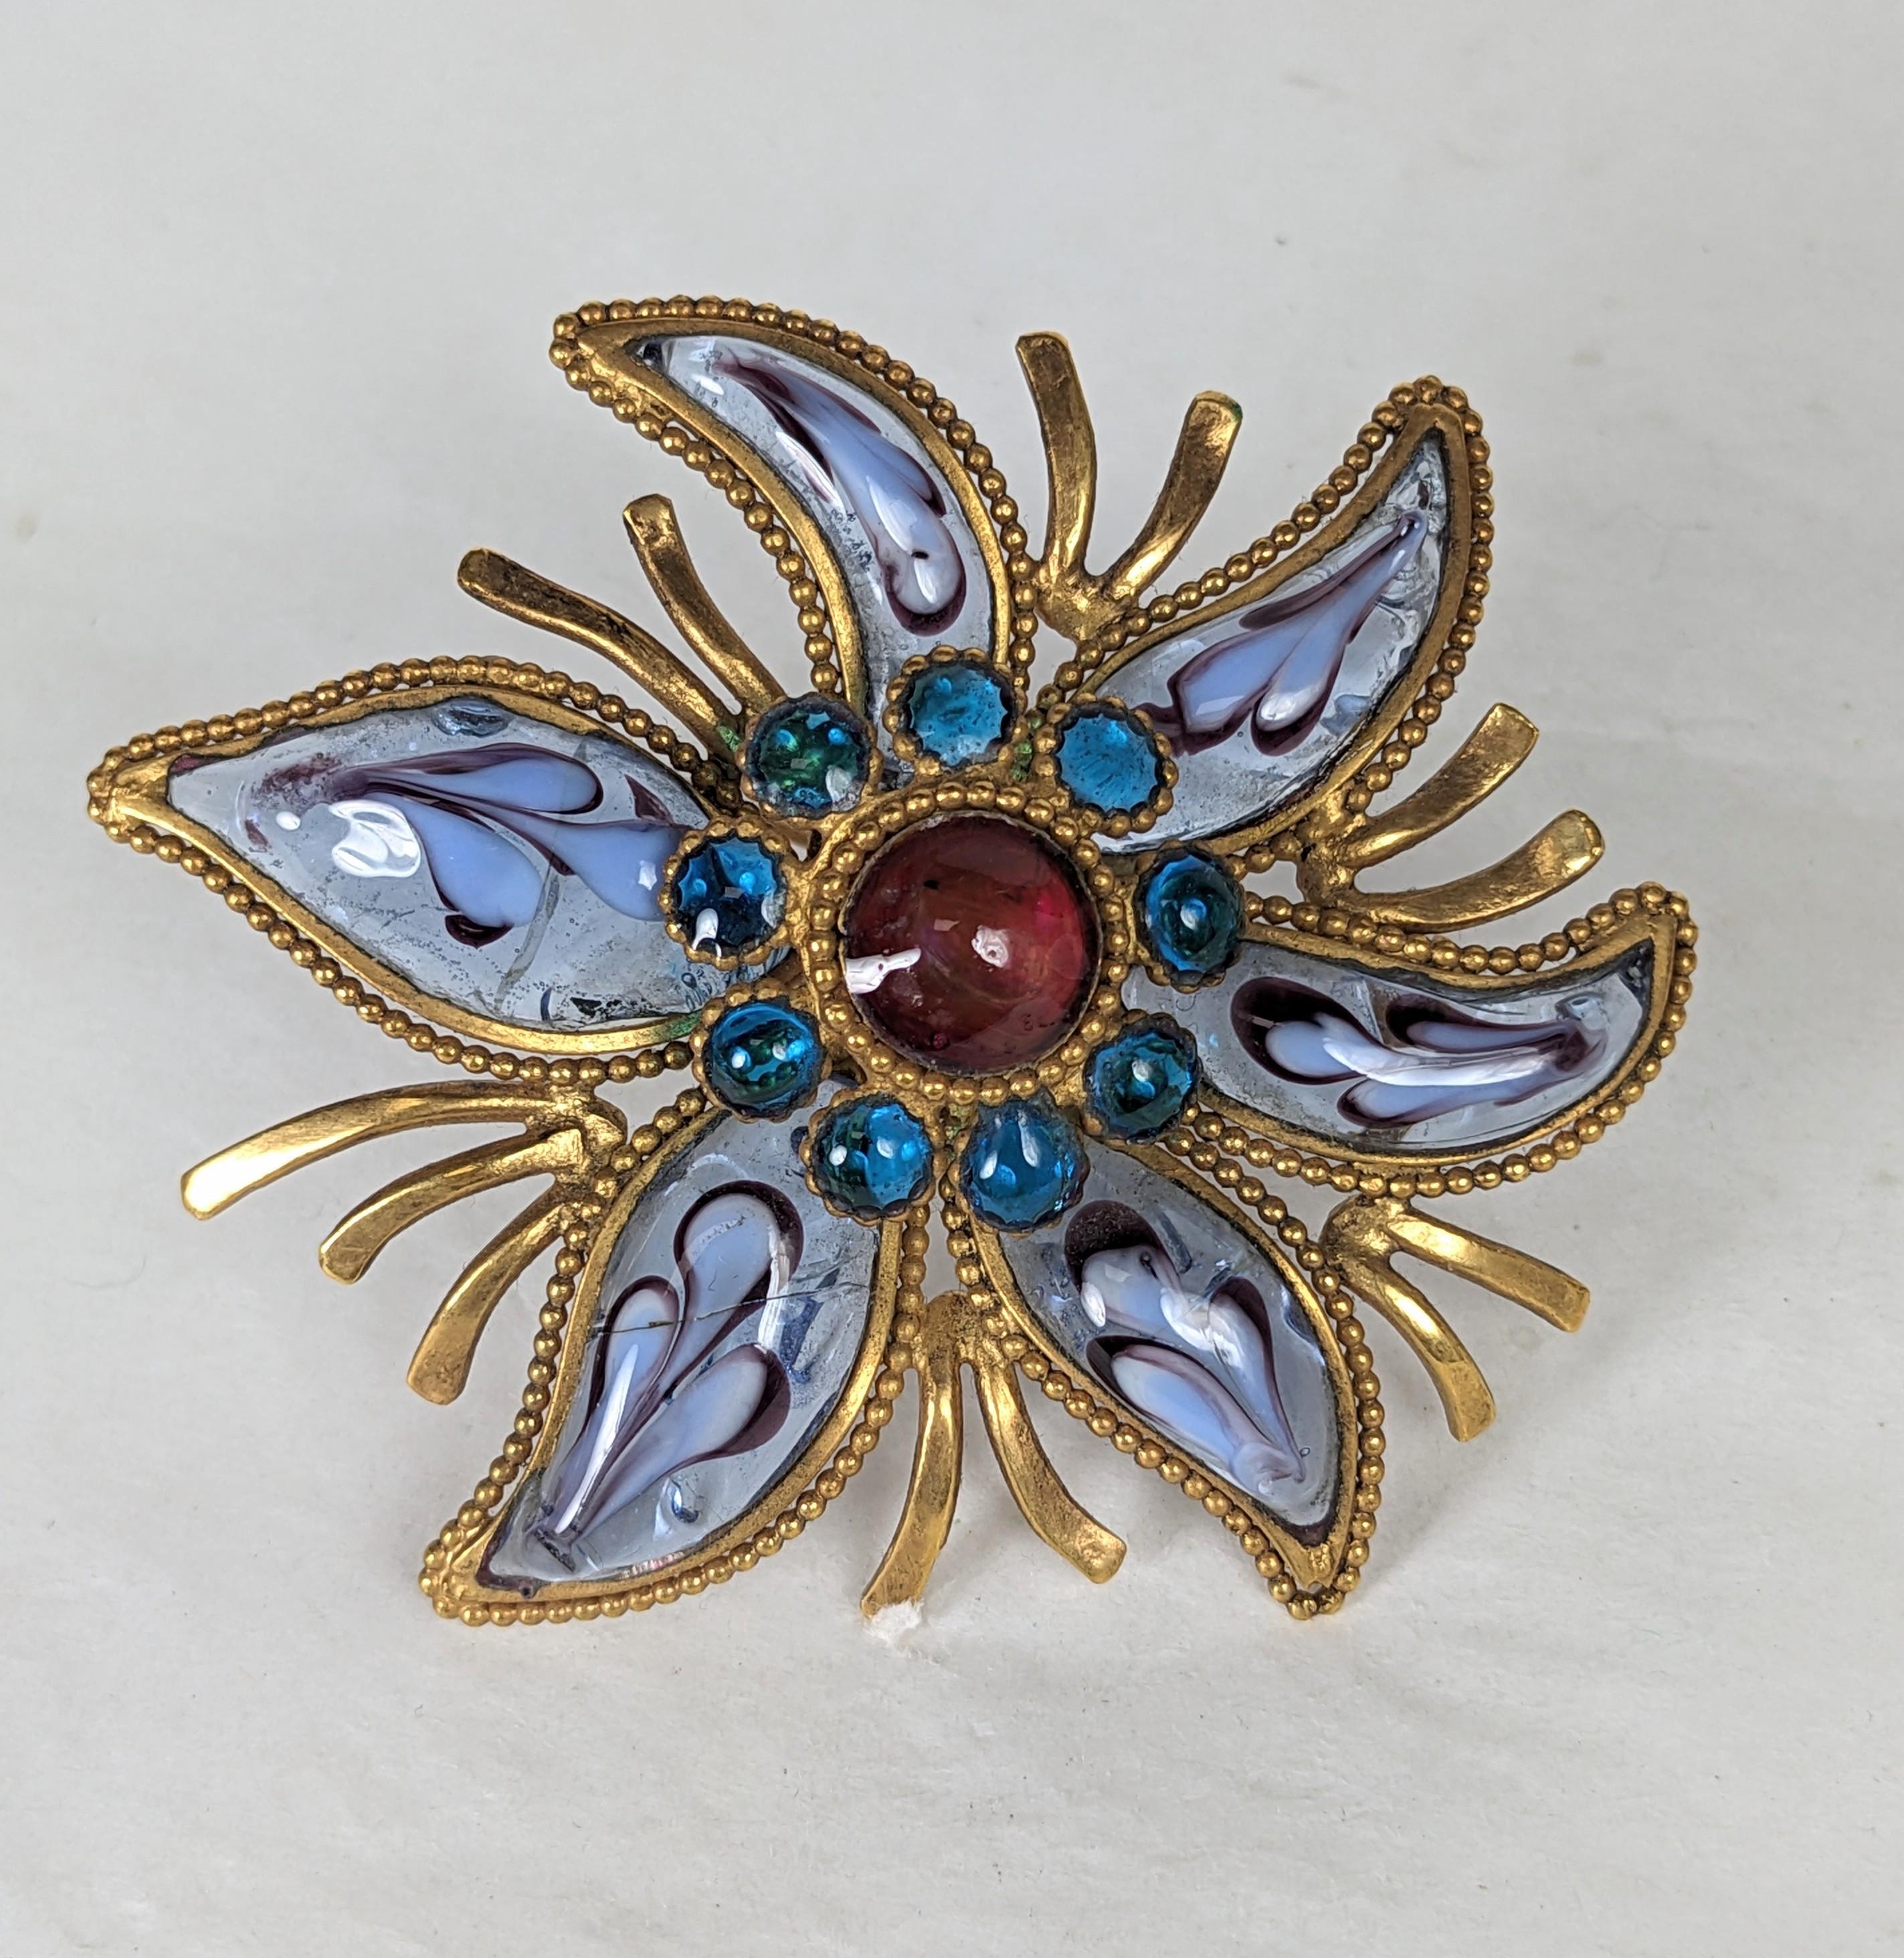 Unusual Maison Gripoix Starfish Brooch from the 1960's. Hand made poured glass with distinctive feather work glass in petals with center of ruby and aquamarine glass cabochons. Elaborate metal work with beaded setting in antique bronze finish. 2.75